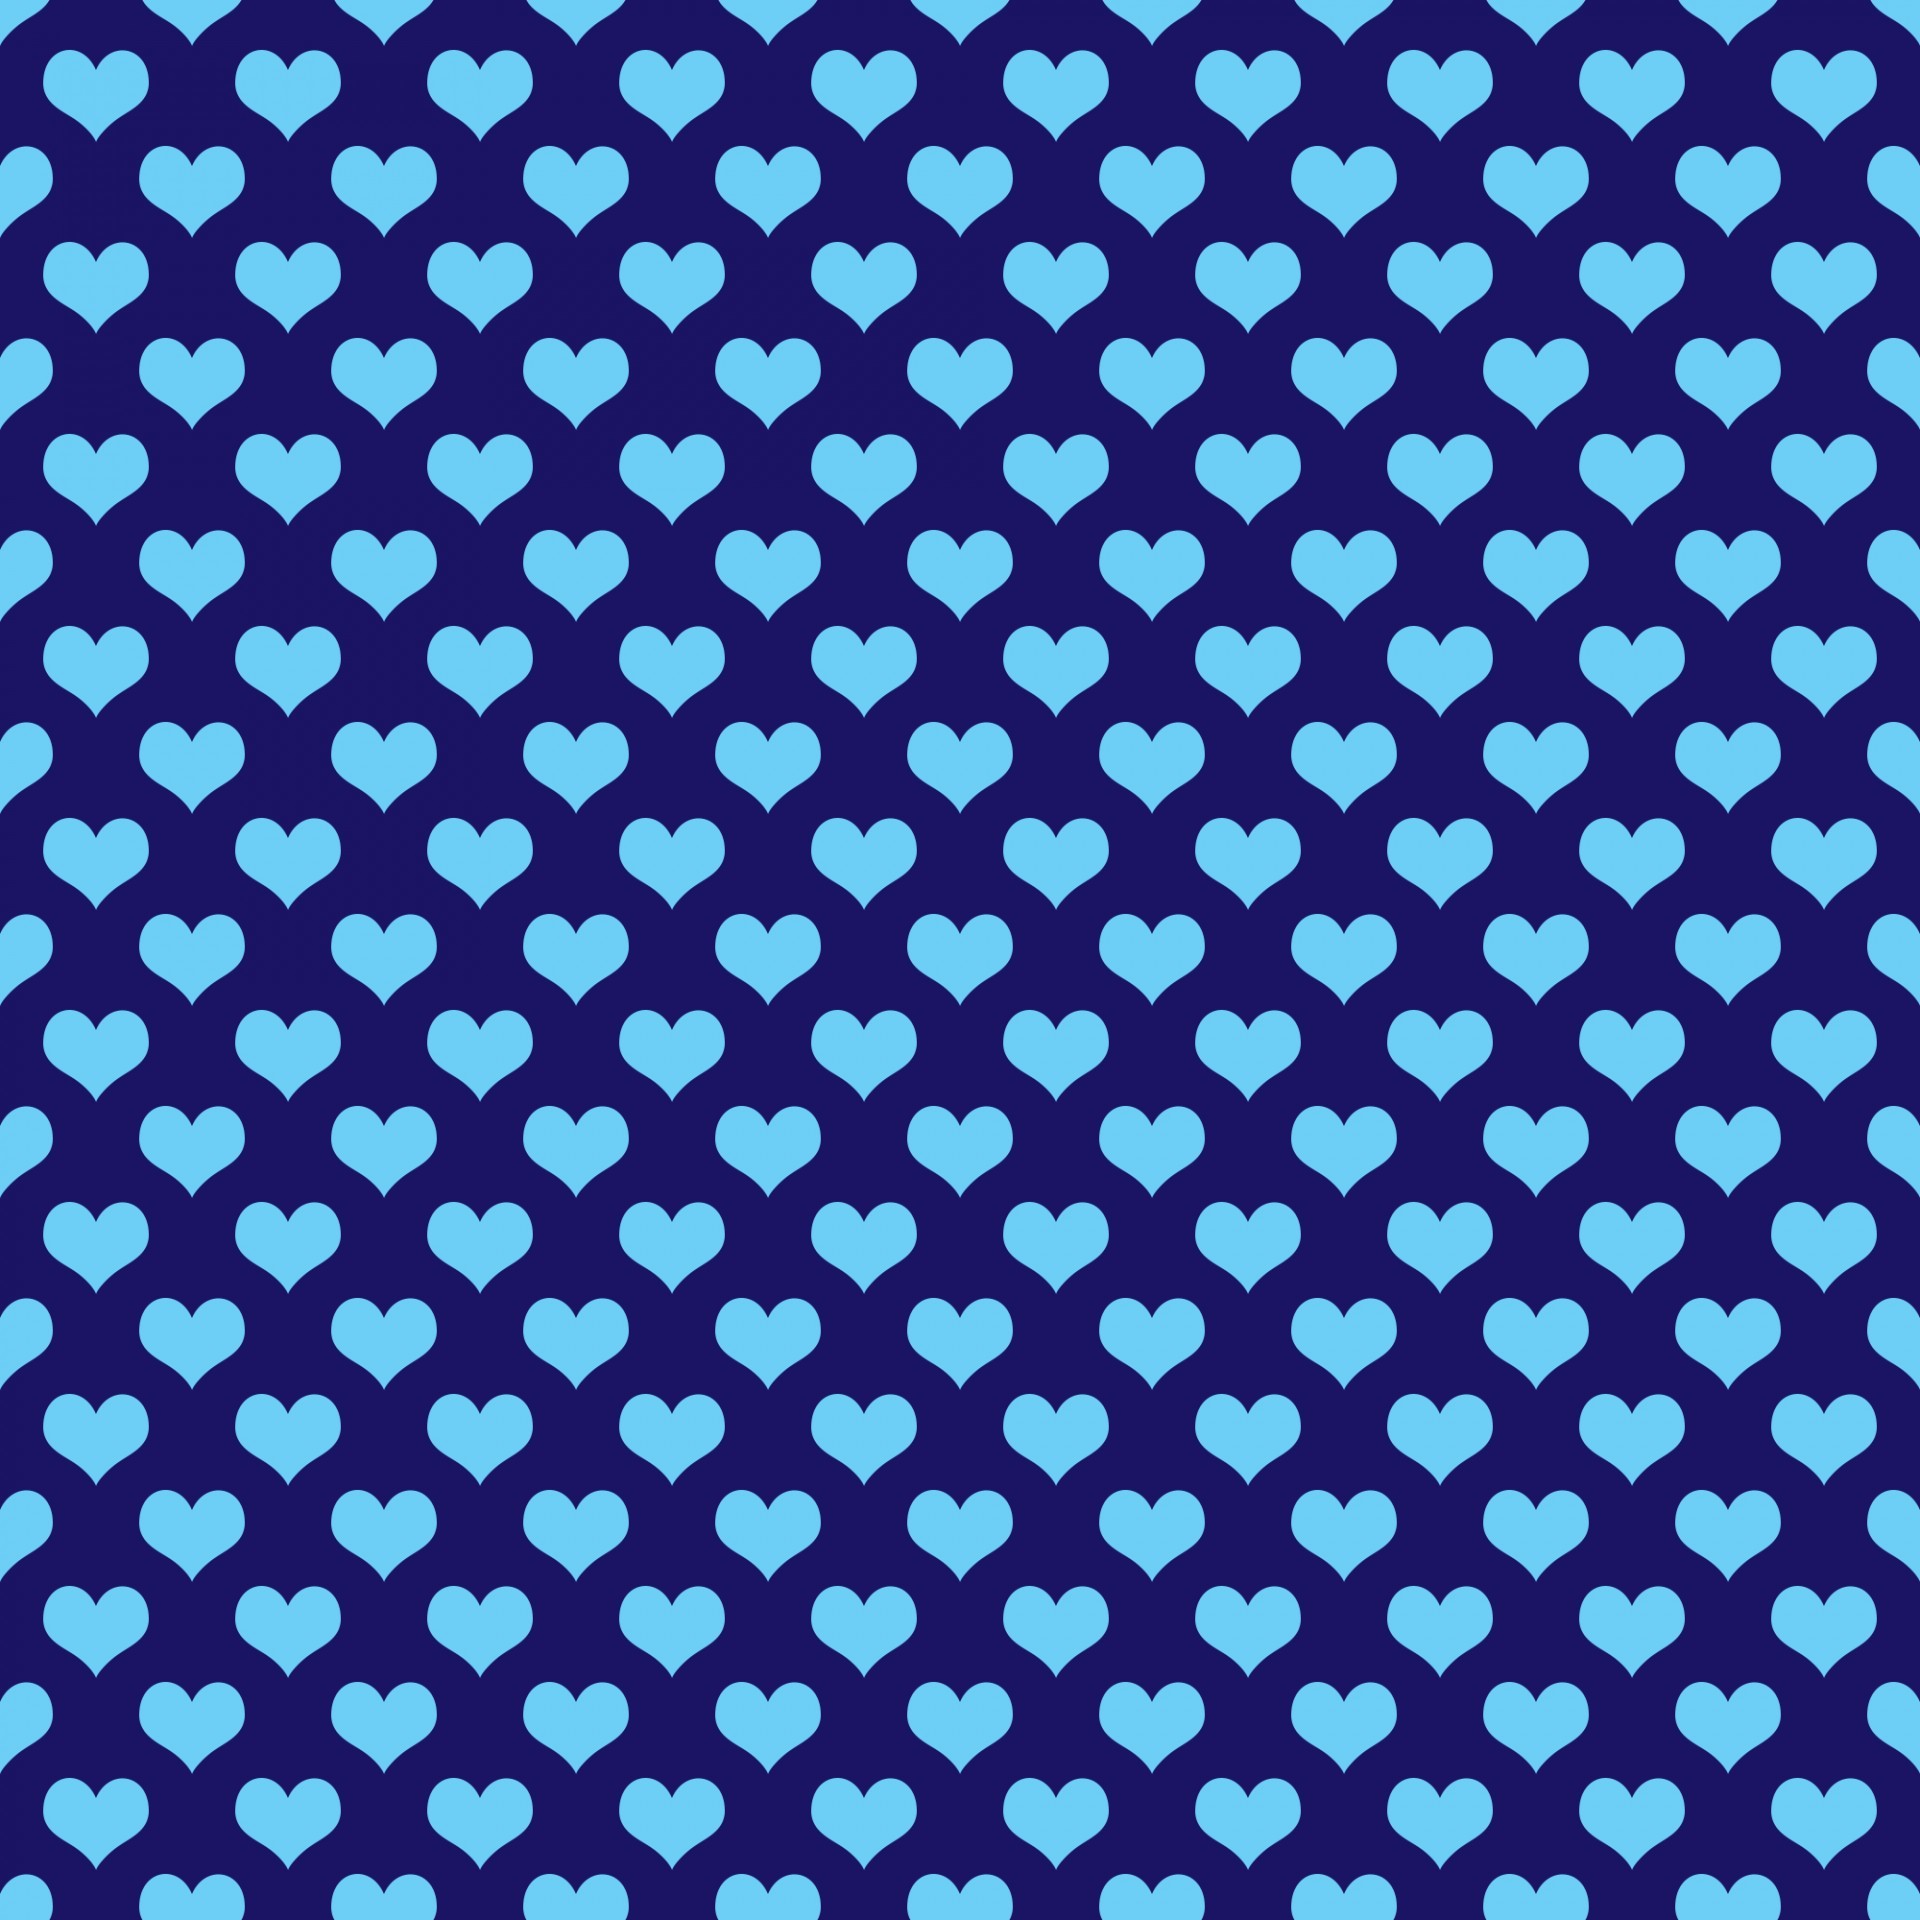 1920x1920 Hearts Background Wallpaper Blue